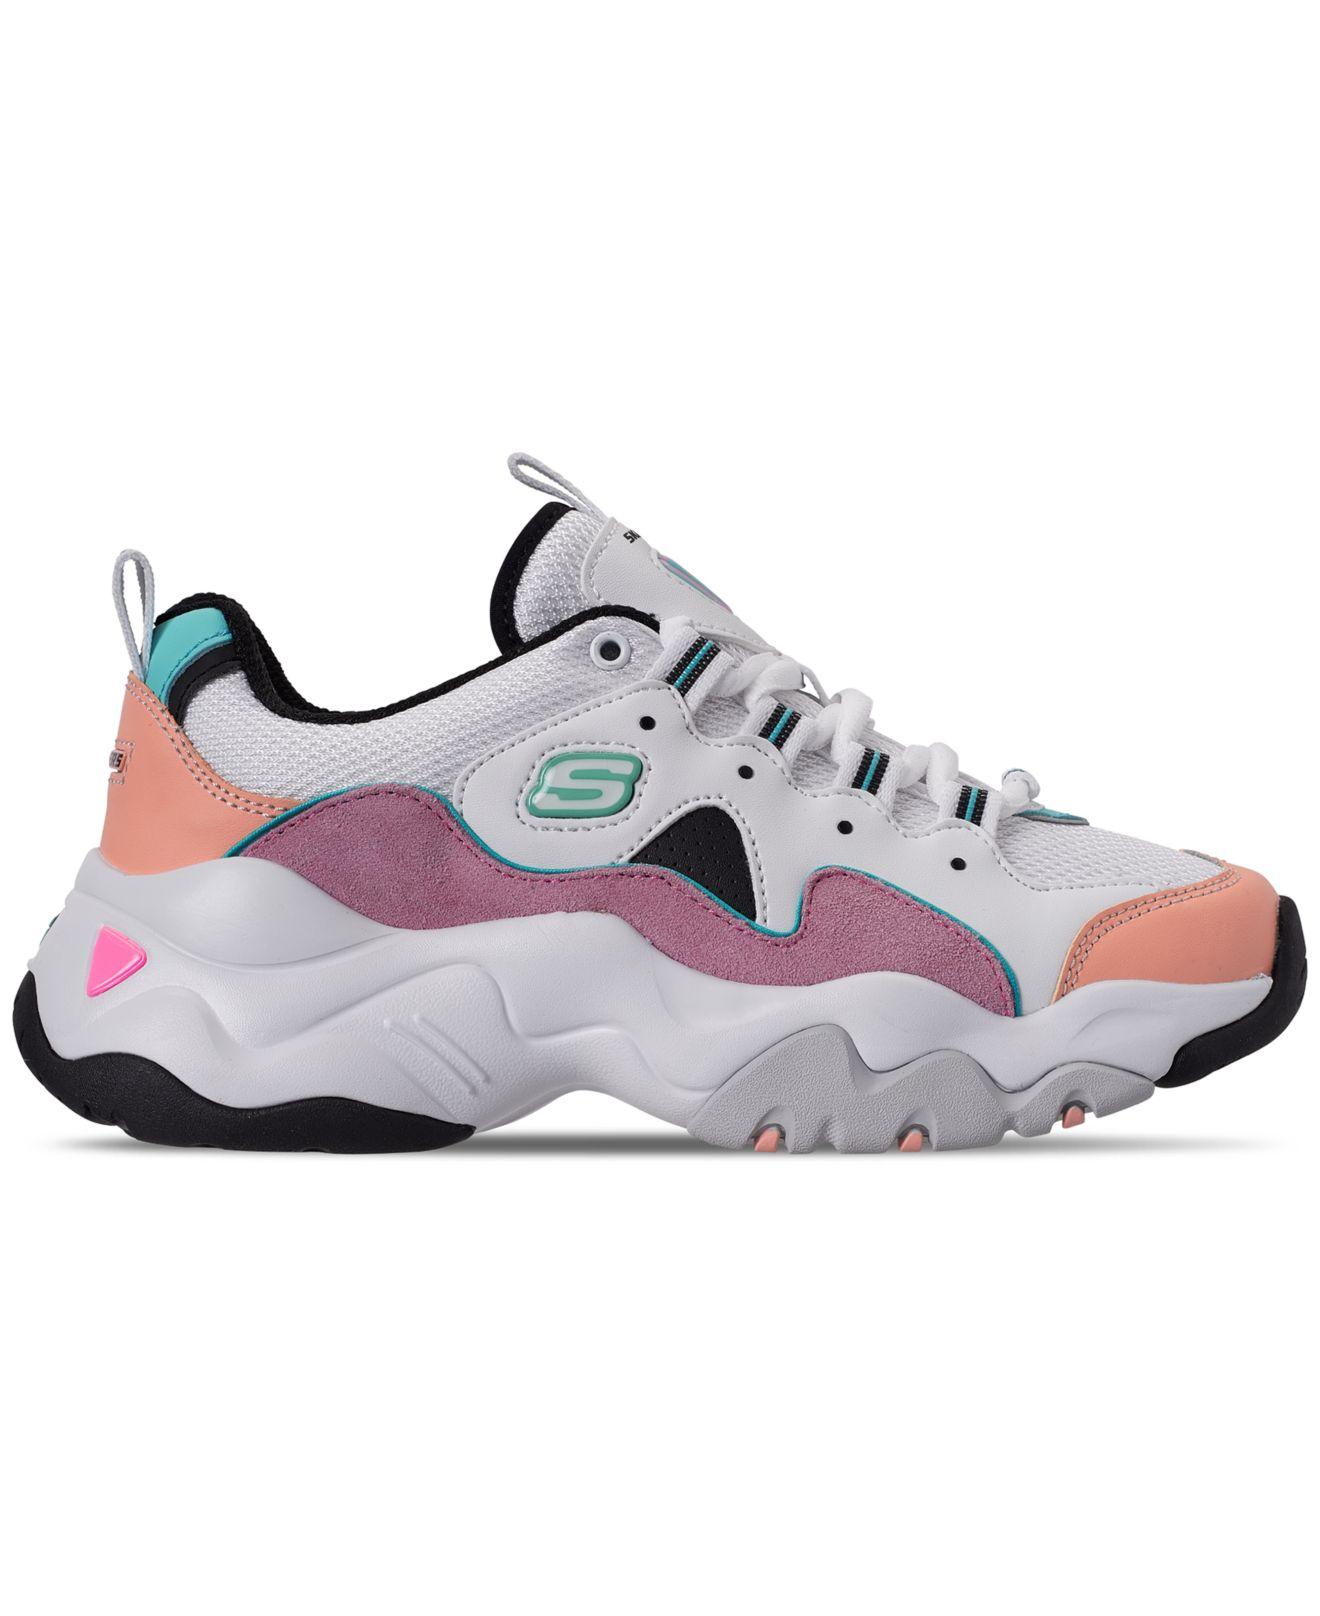 Skechers D'lite Chunky Trainers 3.0 In Pastel | Lyst